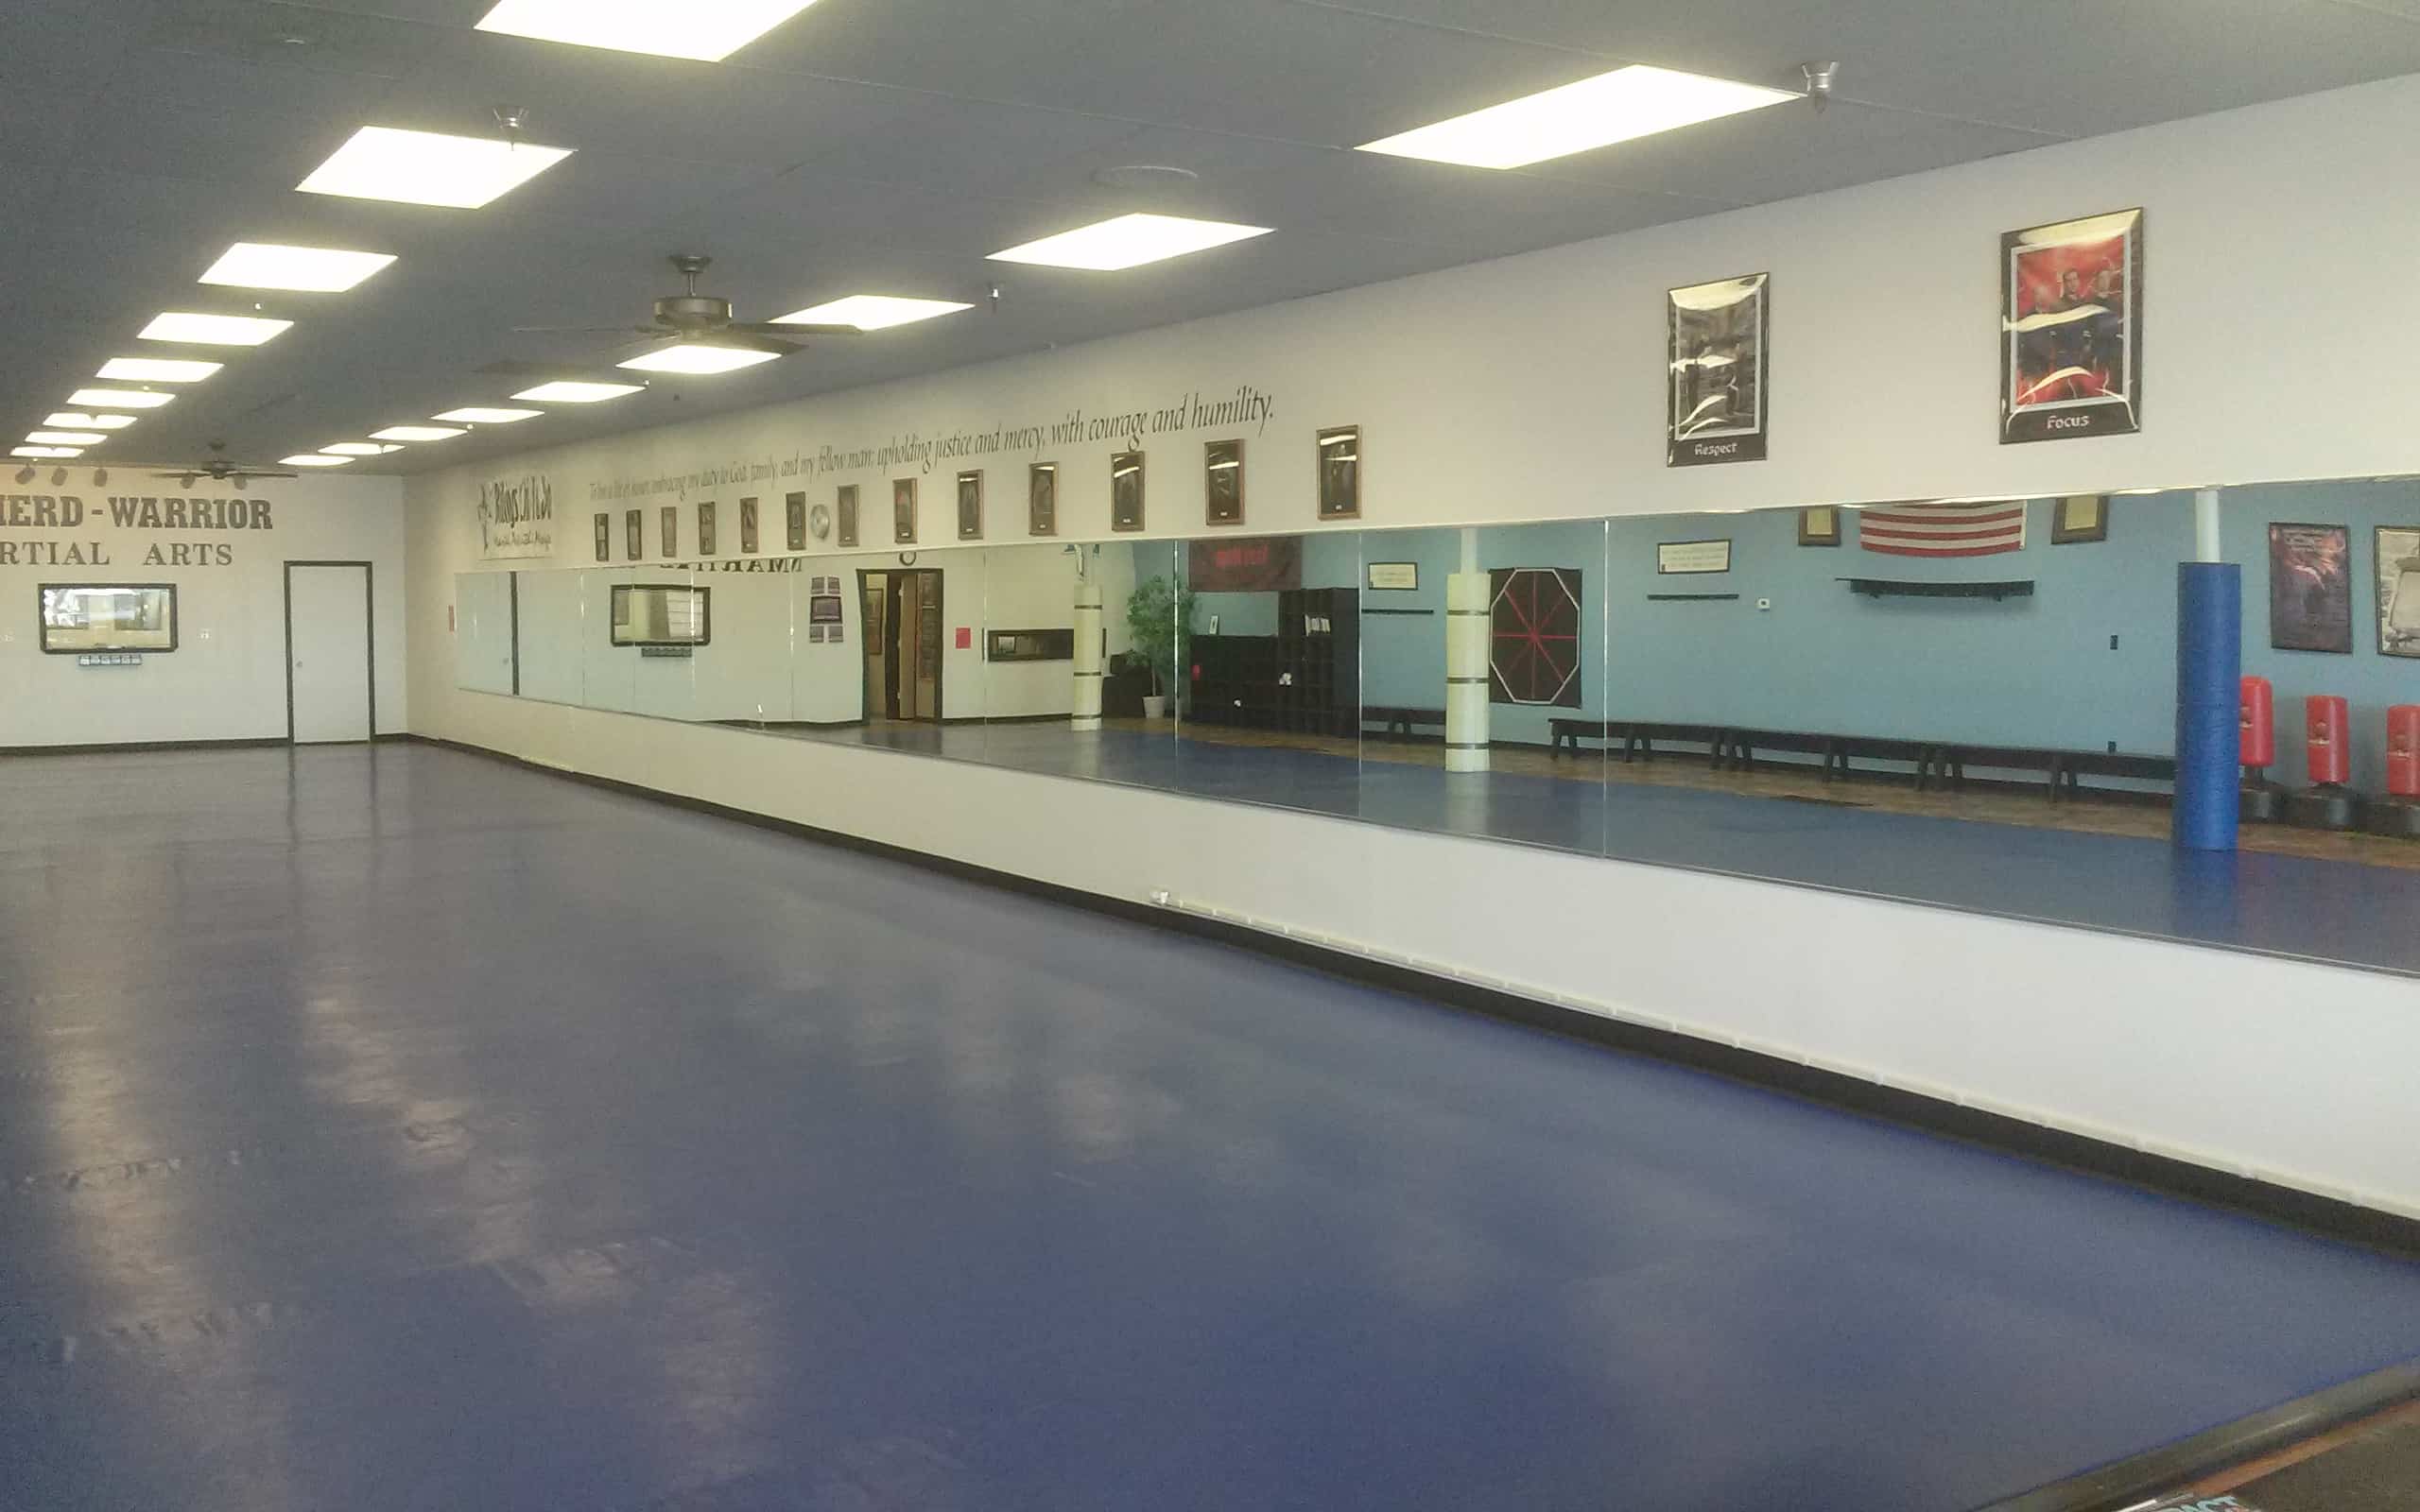 Interior view of the mirror at Shepherd-Warrior Martial Arts